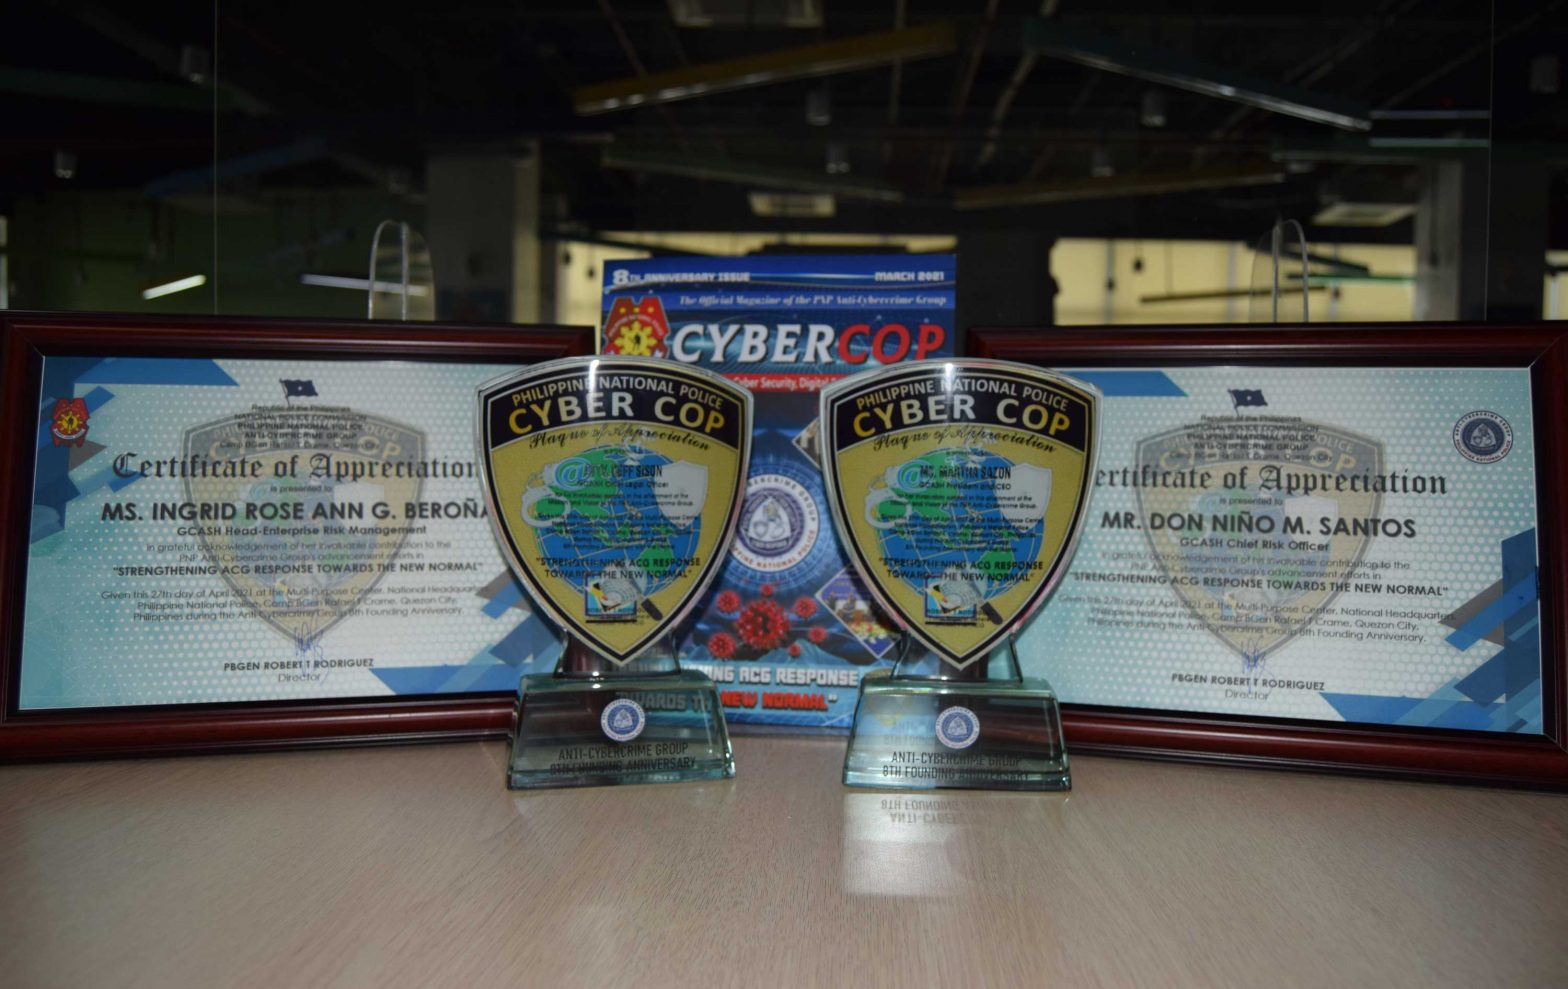 GCash only fintech company to receive recognition from PNP for anti-cybercrime response